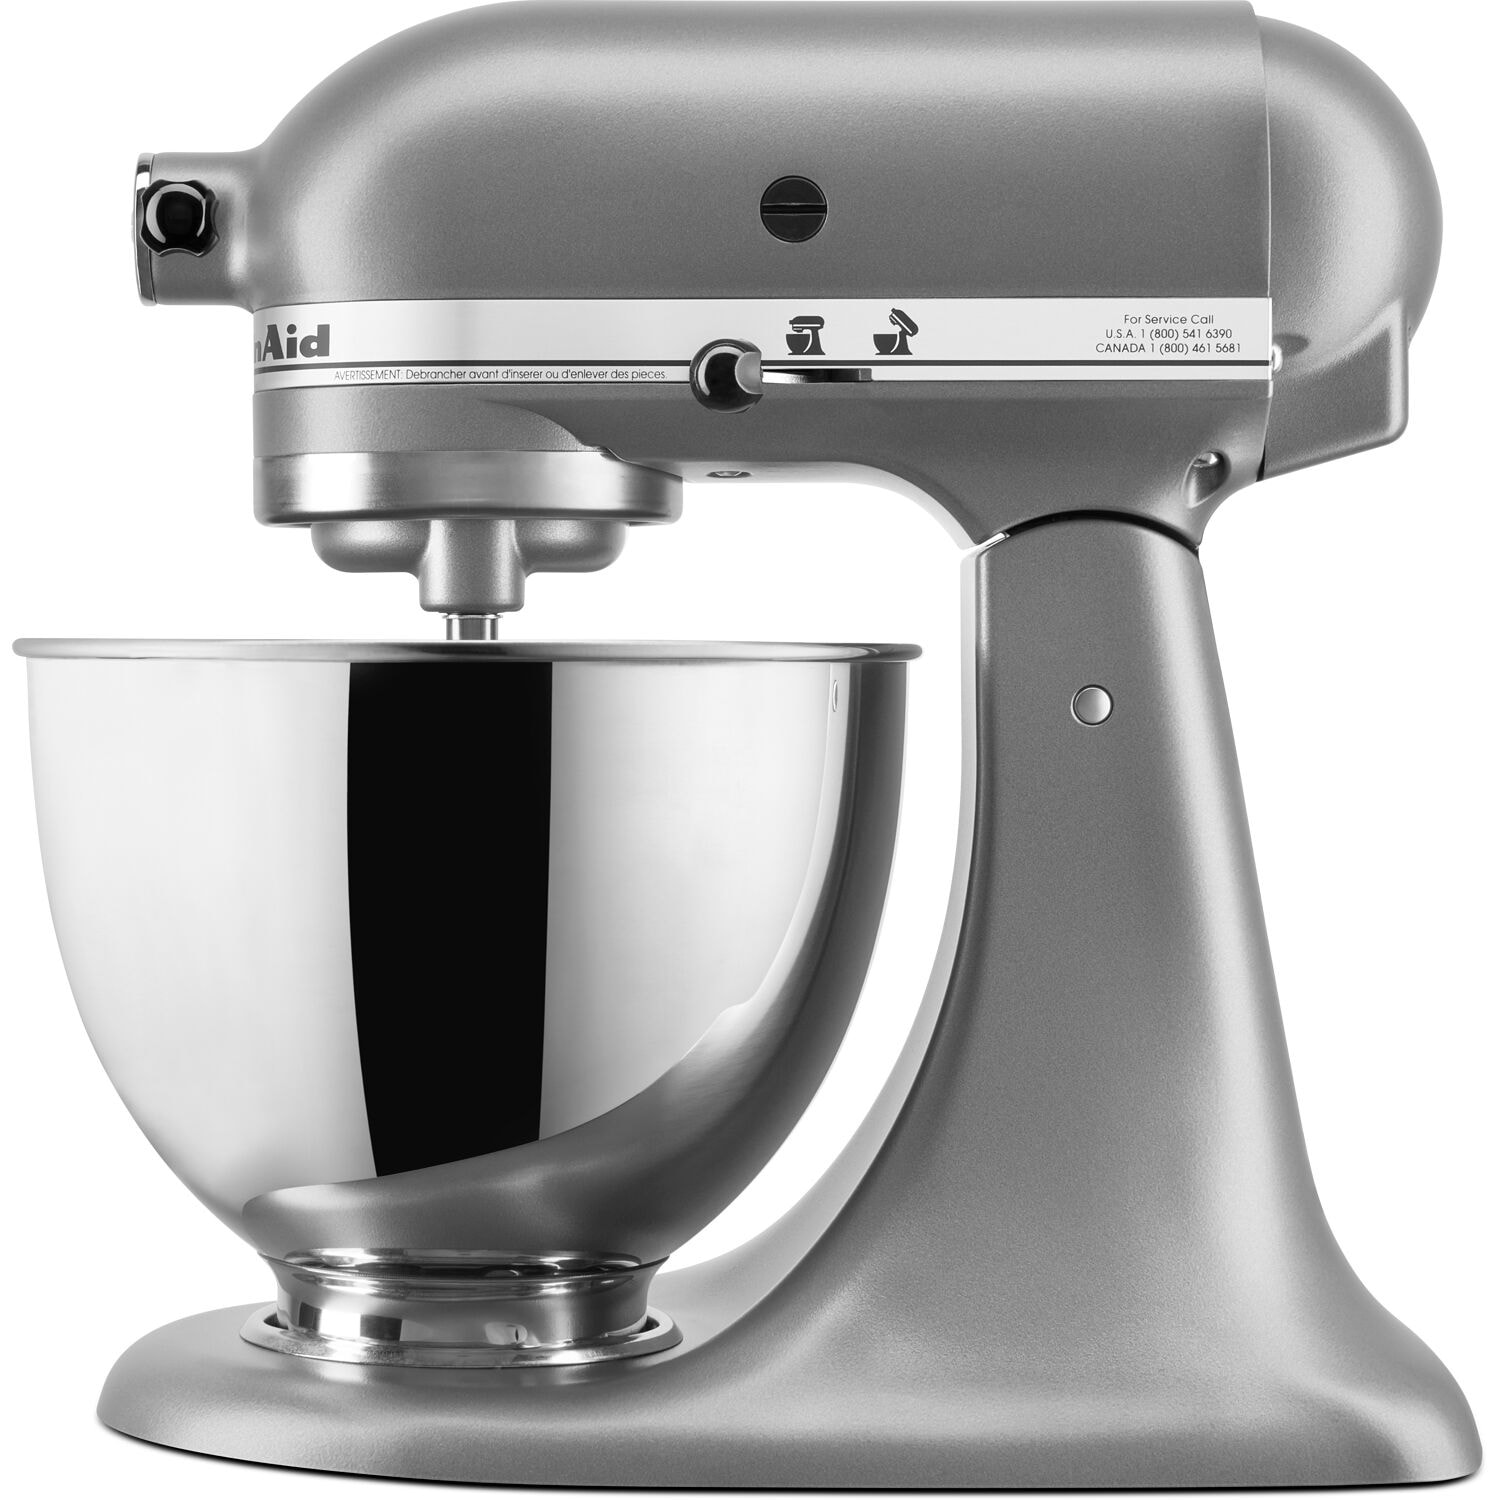 https://ak1.ostkcdn.com/images/products/is/images/direct/99e5d7be8b5f0e4977e760ddec1278939b42e7a3/KitchenAid-Deluxe-4.5-Quart-Tilt-Head-Stand-Mixer-in-Silver.jpg